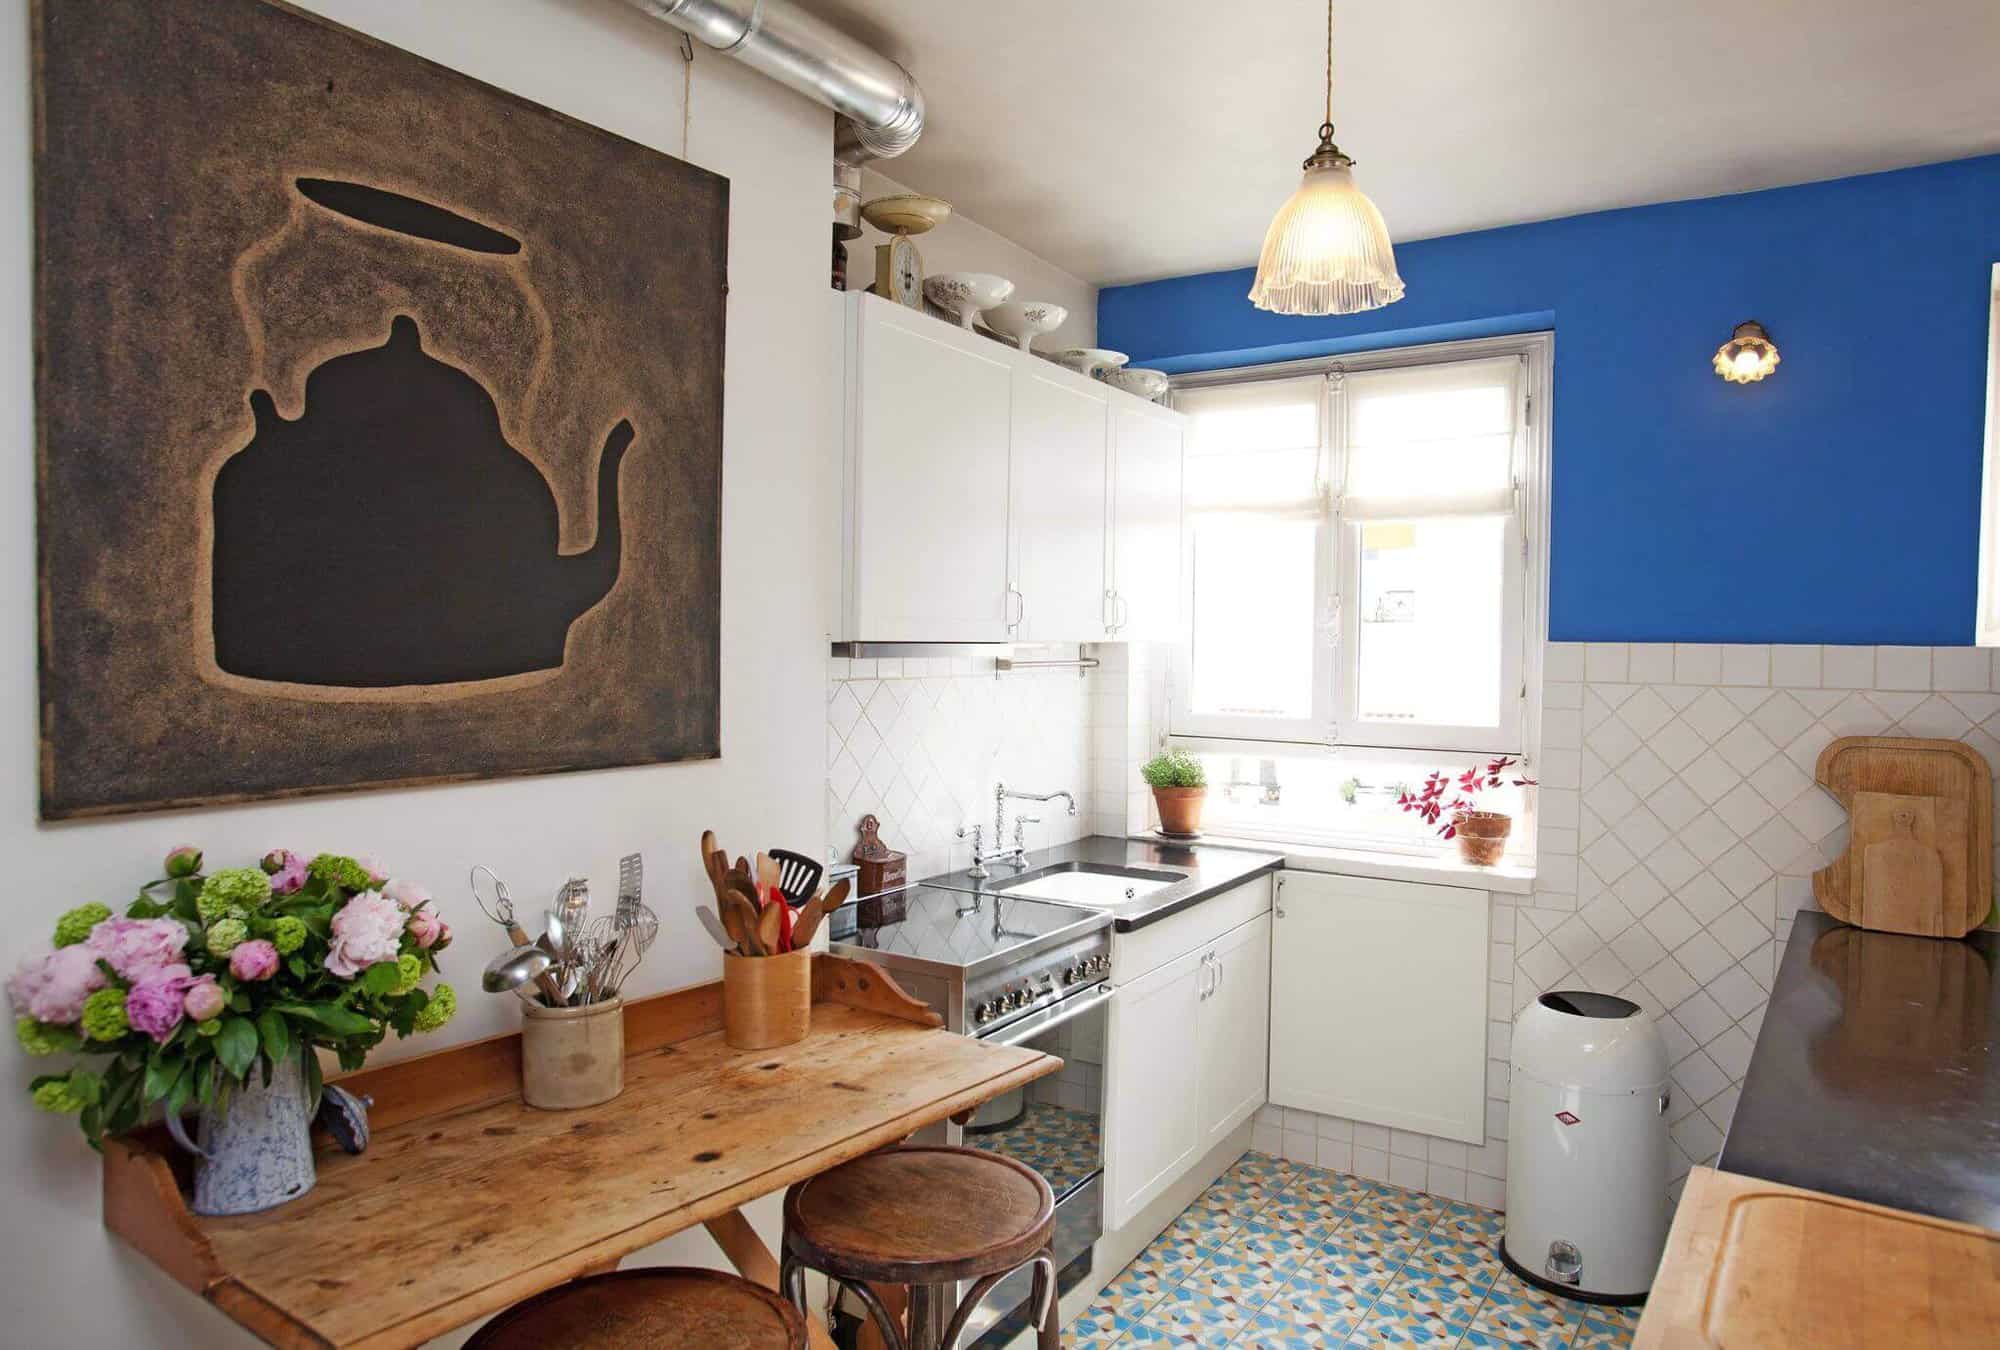 A breakfast bar with wooden stools sits to the left of a silver oven in inside a blue and white kitchen 